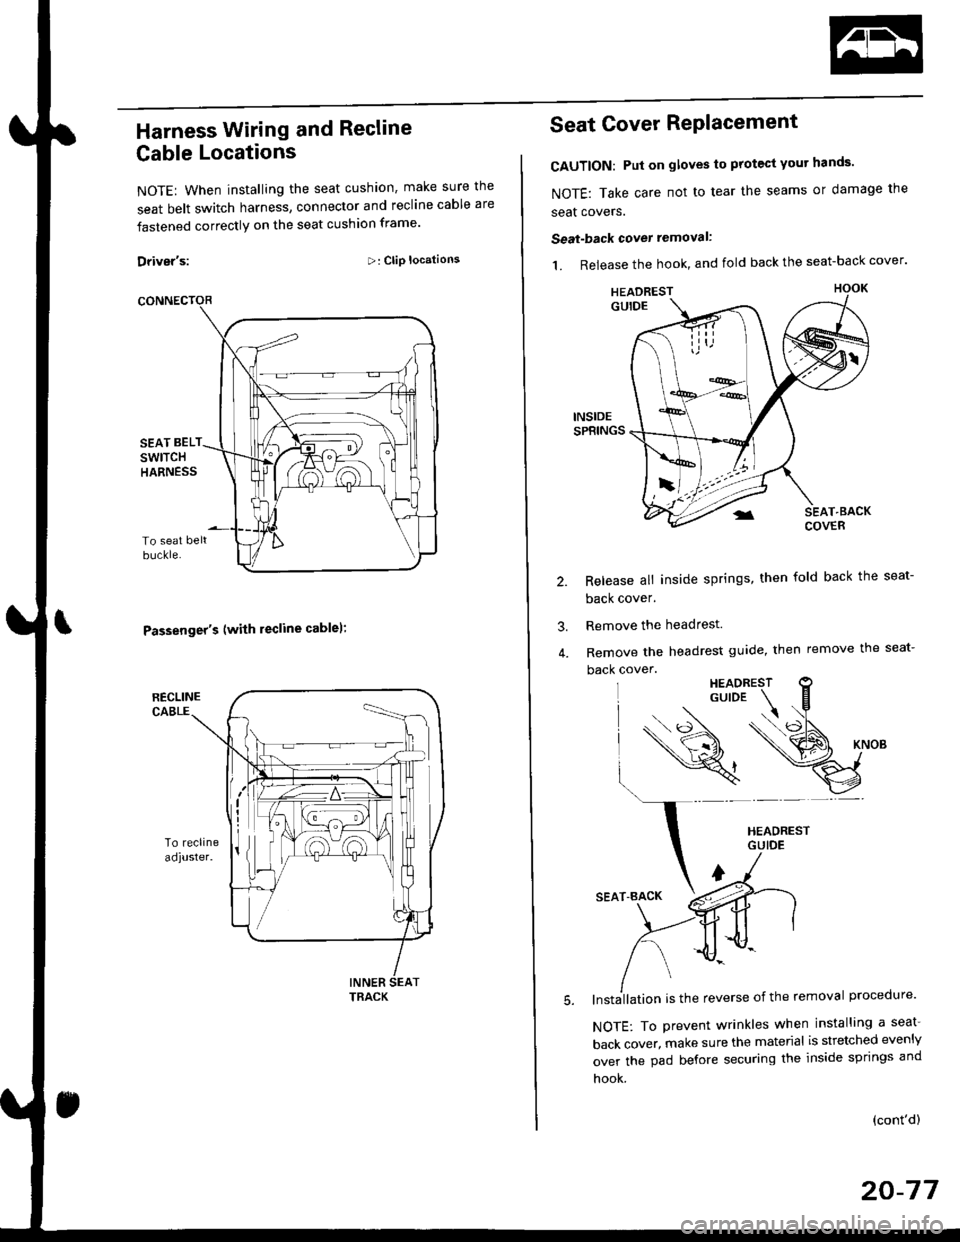 HONDA CIVIC 1996 6.G Workshop Manual Harness Wiring and Recline
Cable Locations
NOTE: When installing the seat cushion, make sure the
seat belt switch harness, connector and recline cable are
fastened correctly on the seat cushion frame